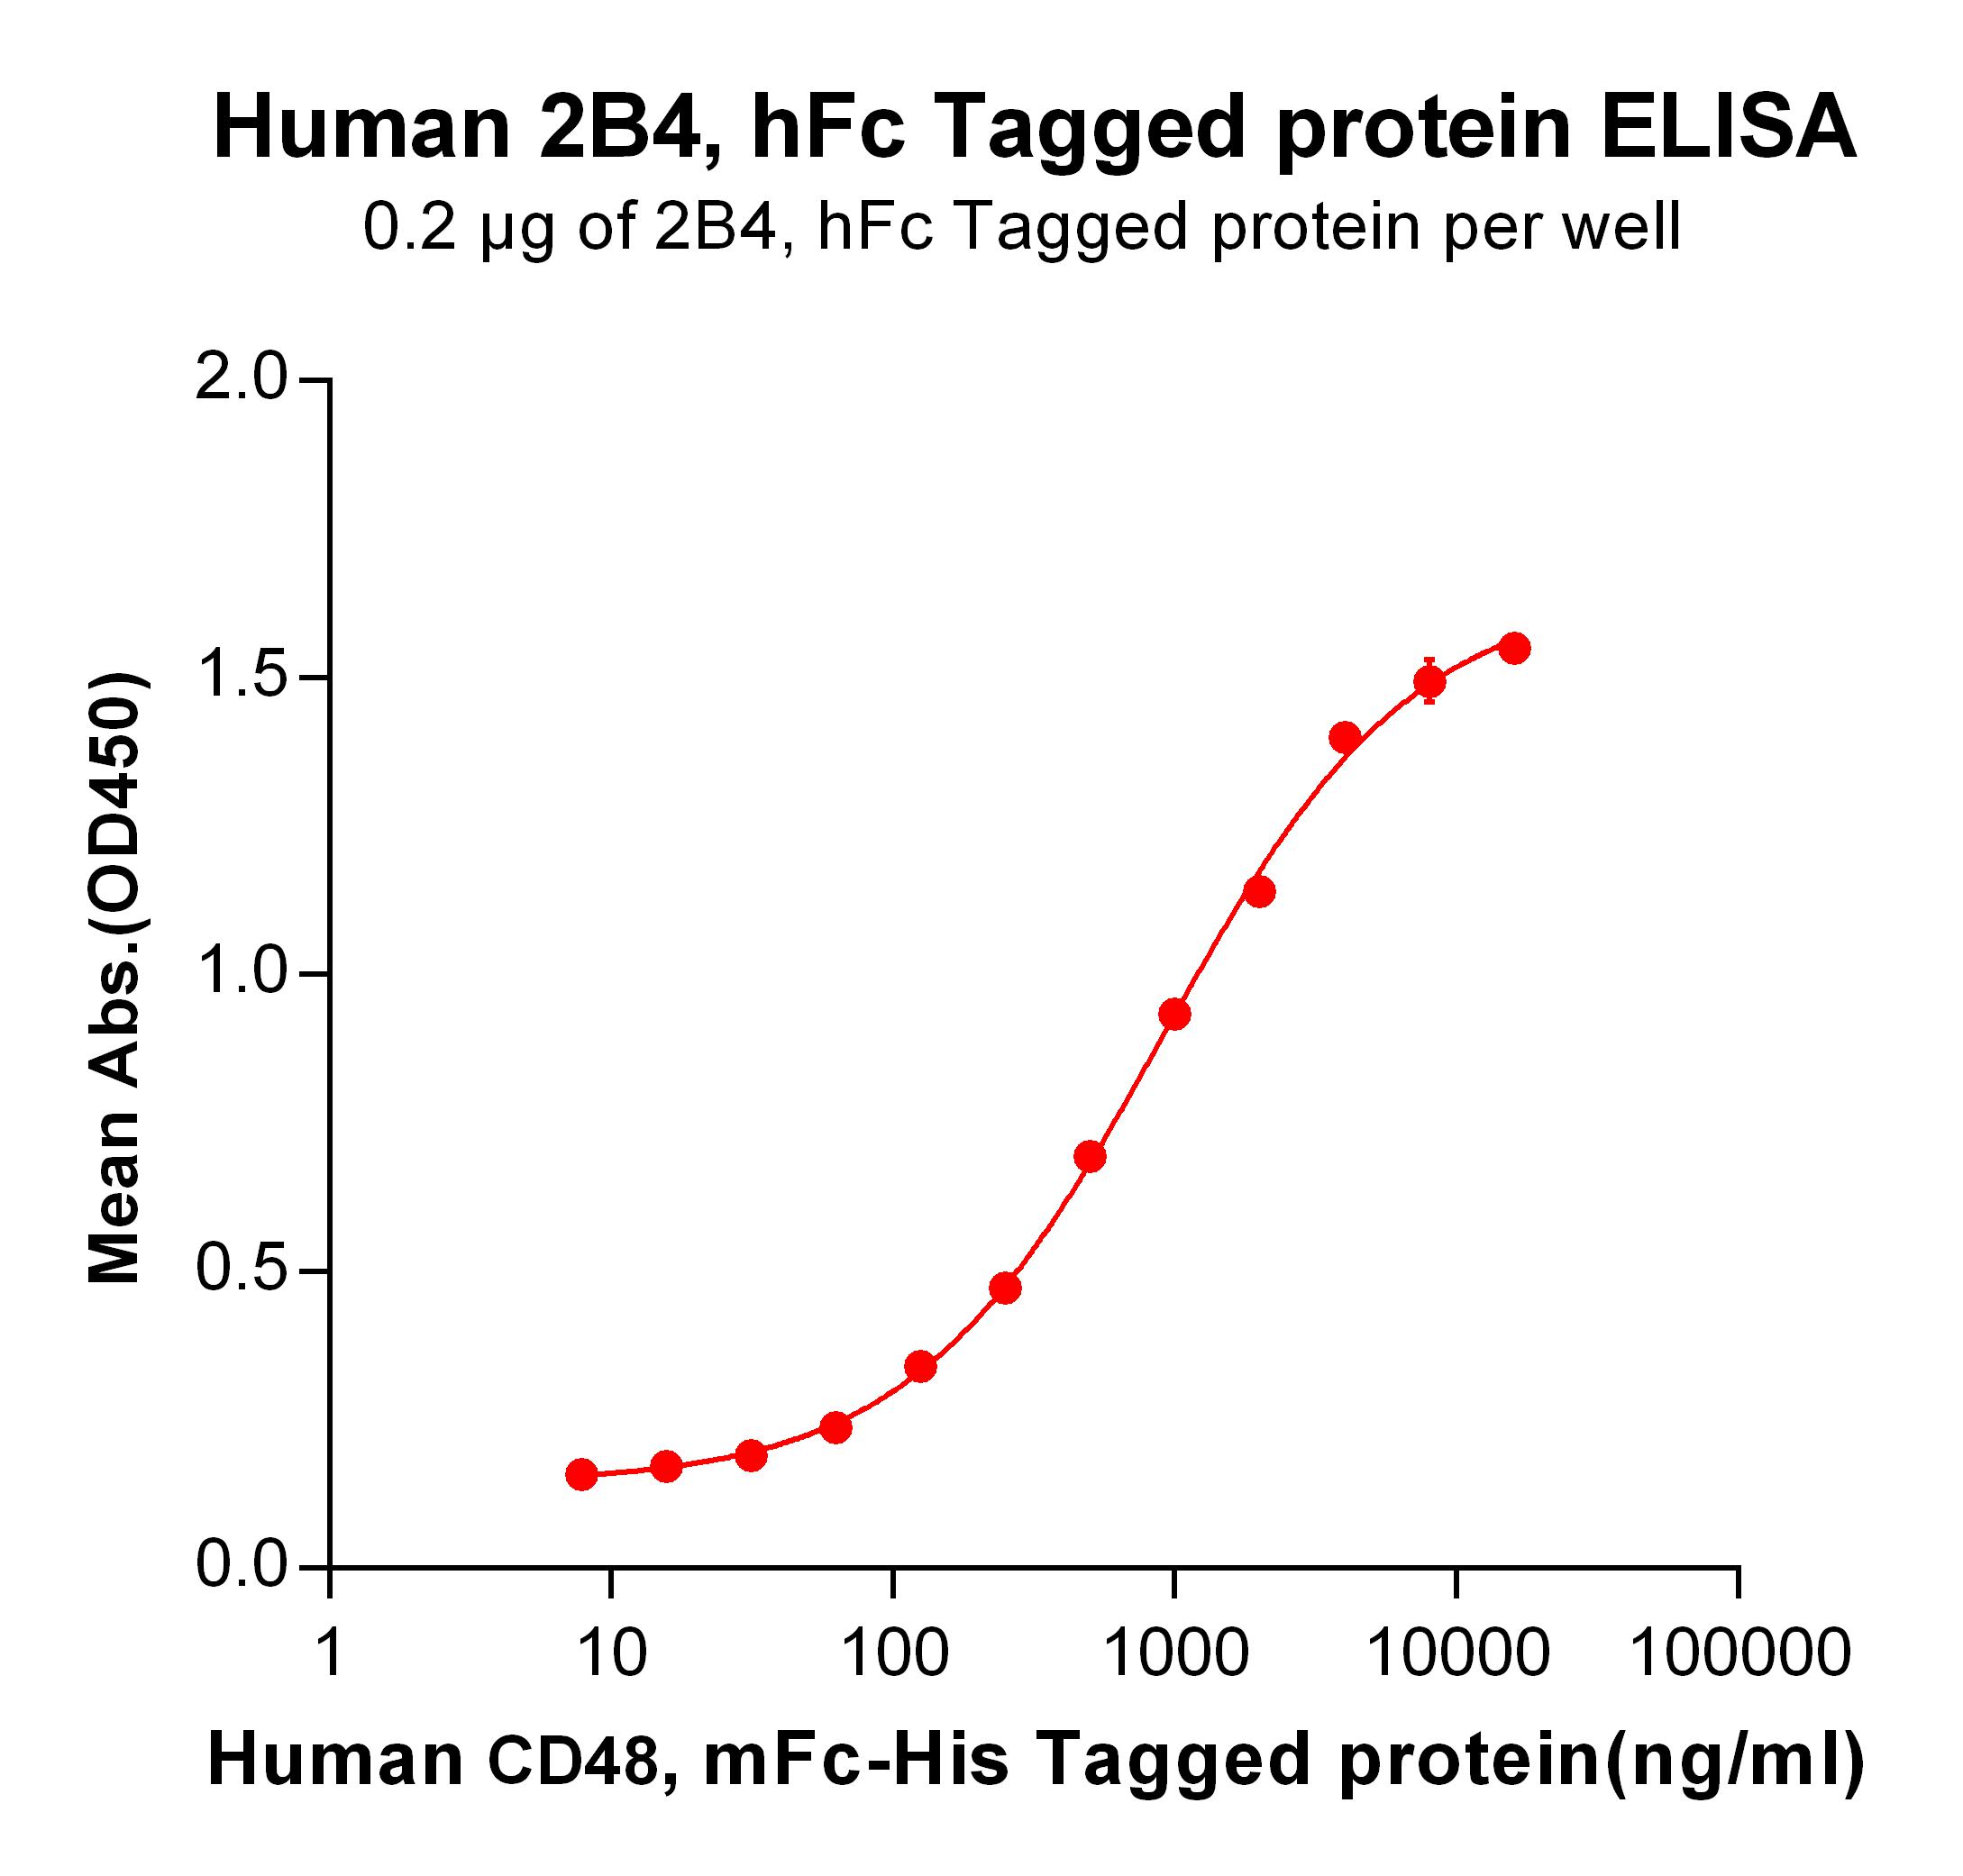 Figure 2. ELISA plate pre-coated by 2 µg/ml (100 µl/well) Human CD48, mFc-His tagged protein  can bind Human 2B4, hFc tagged protein  in a linear range of 62.5-4000 ng/ml.